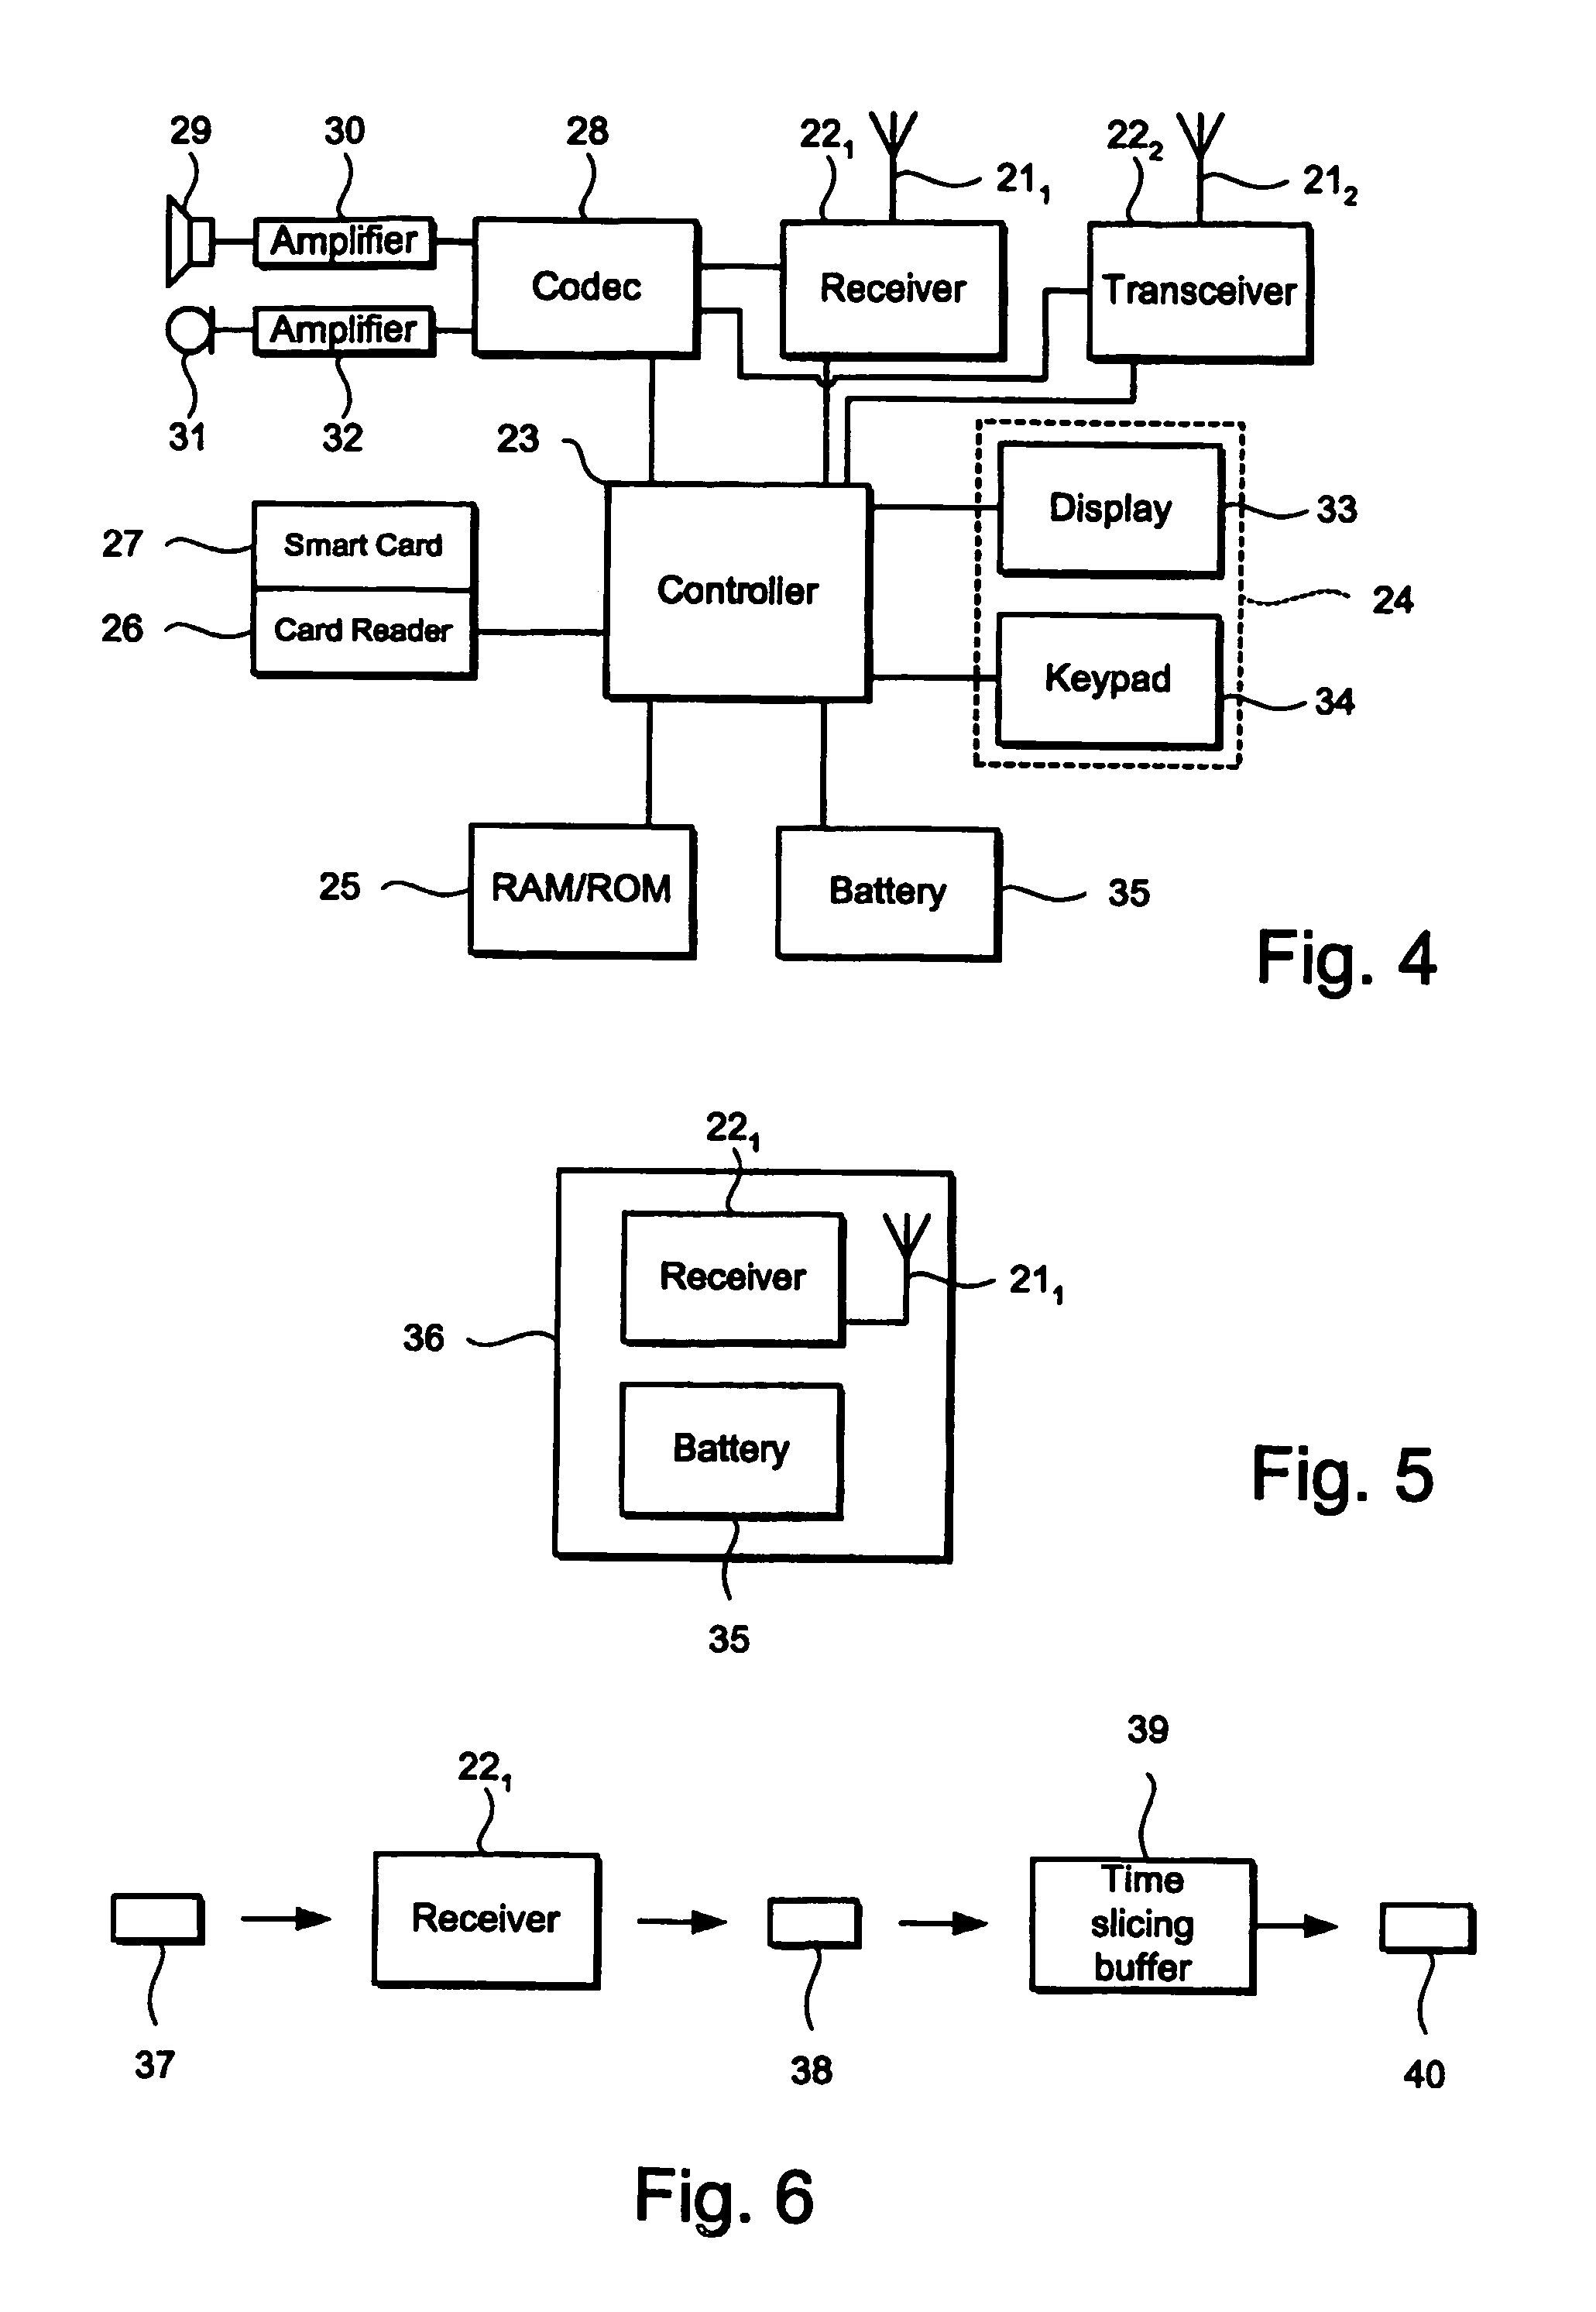 Method for signalling time-slicing parameters in the service information